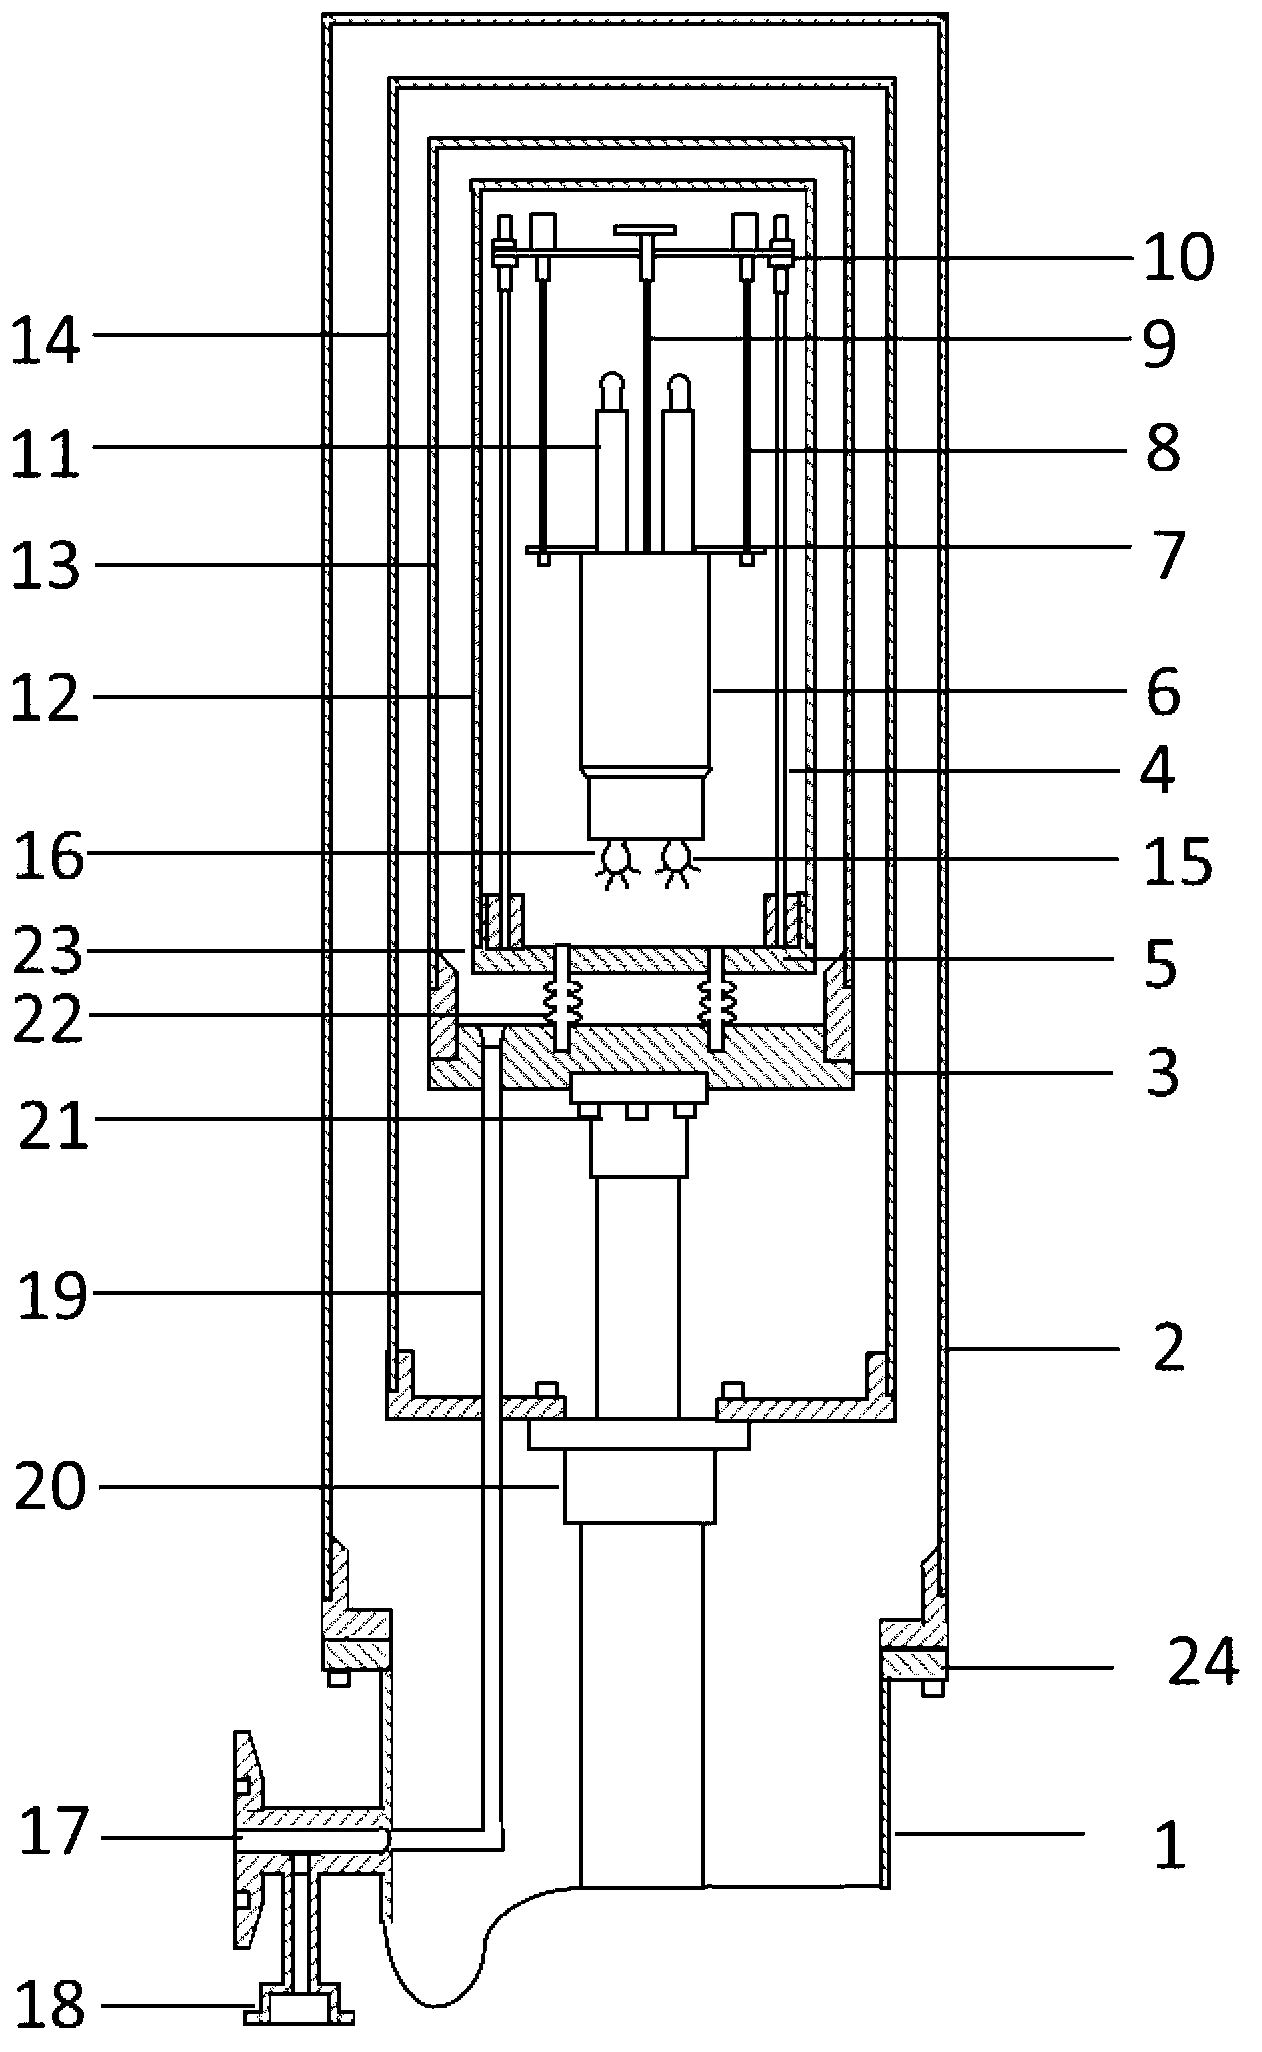 Triple point recurrence device with refrigerating machine serving as cooling source